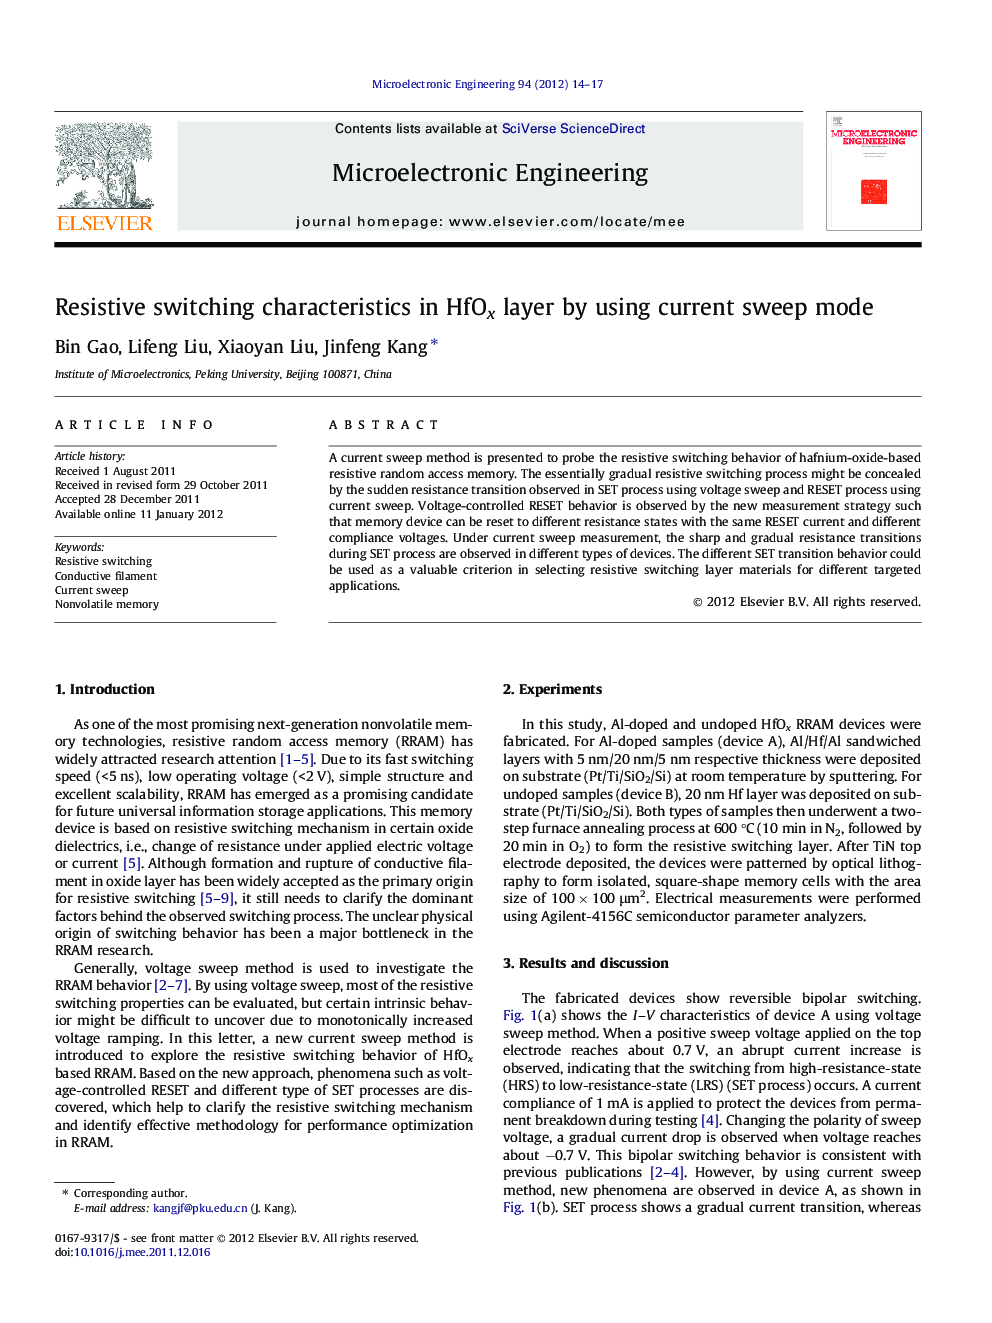 Resistive switching characteristics in HfOx layer by using current sweep mode